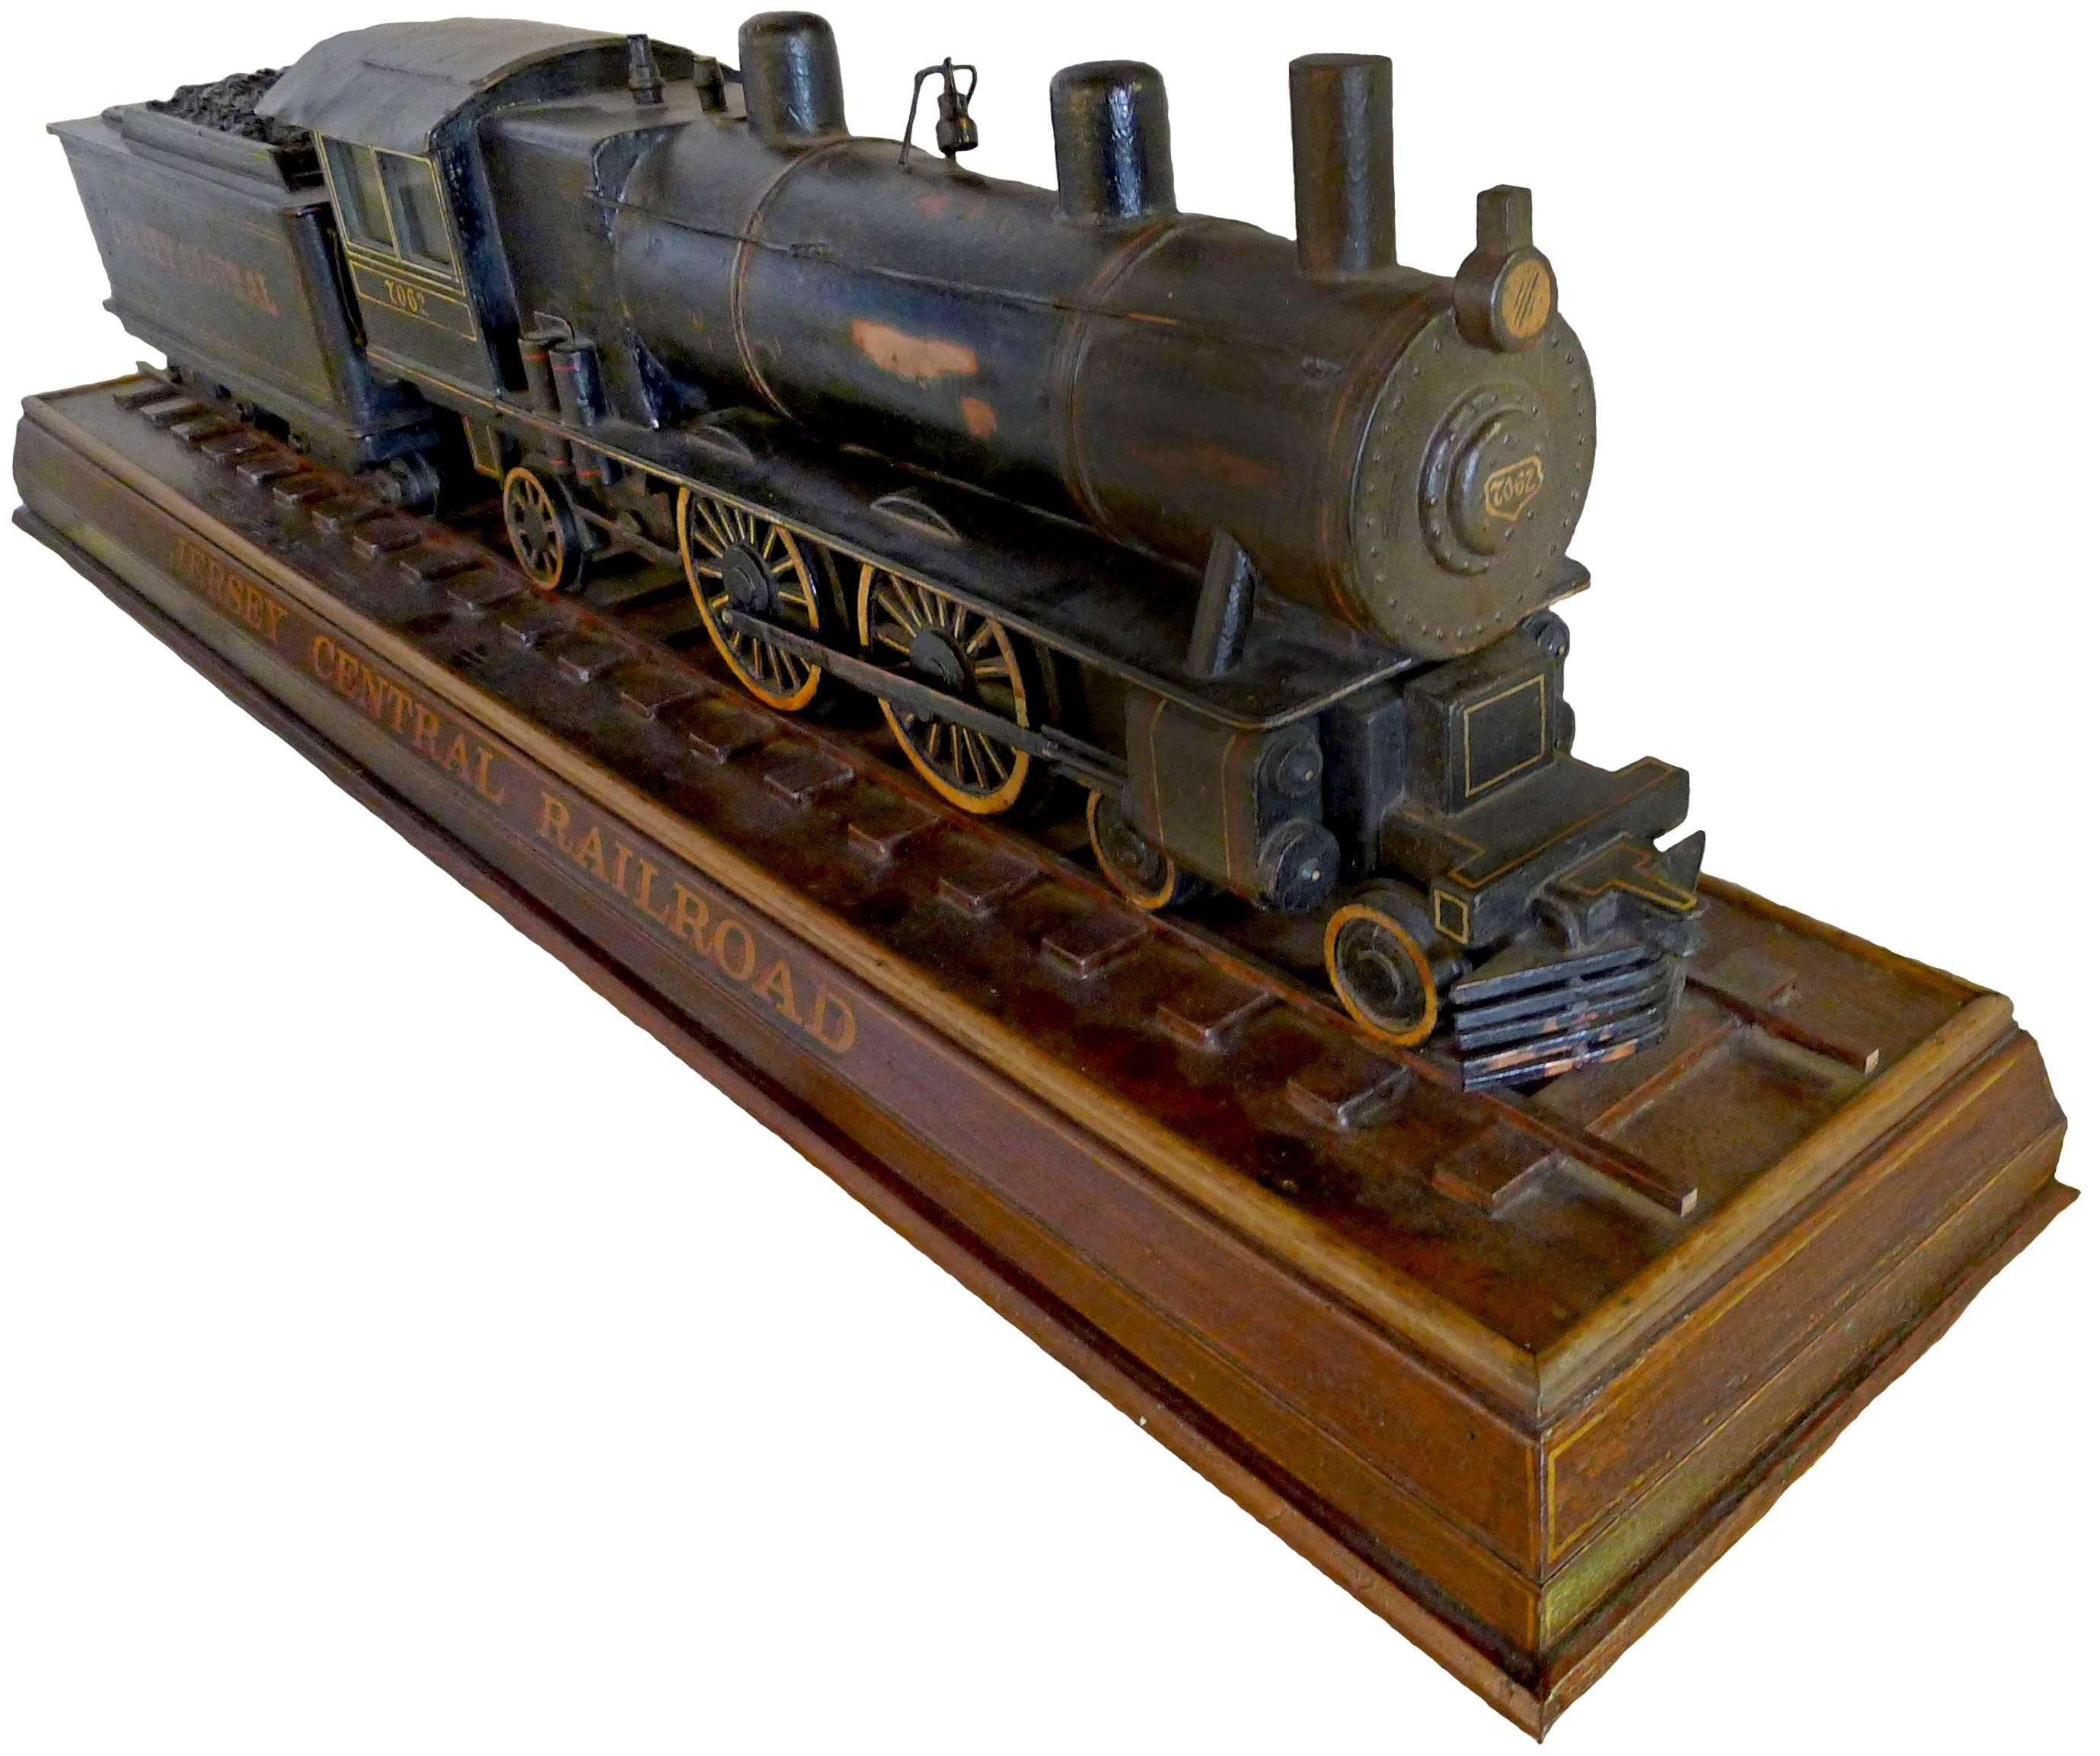 John Elder model Jersey Central Railroad train. Painted copper and wood construction on a wooden base stenciled "Jersey Central". John Elder paper label inside the train cab. 
John Elder was born in Northern Ireland in 1872 and moved to